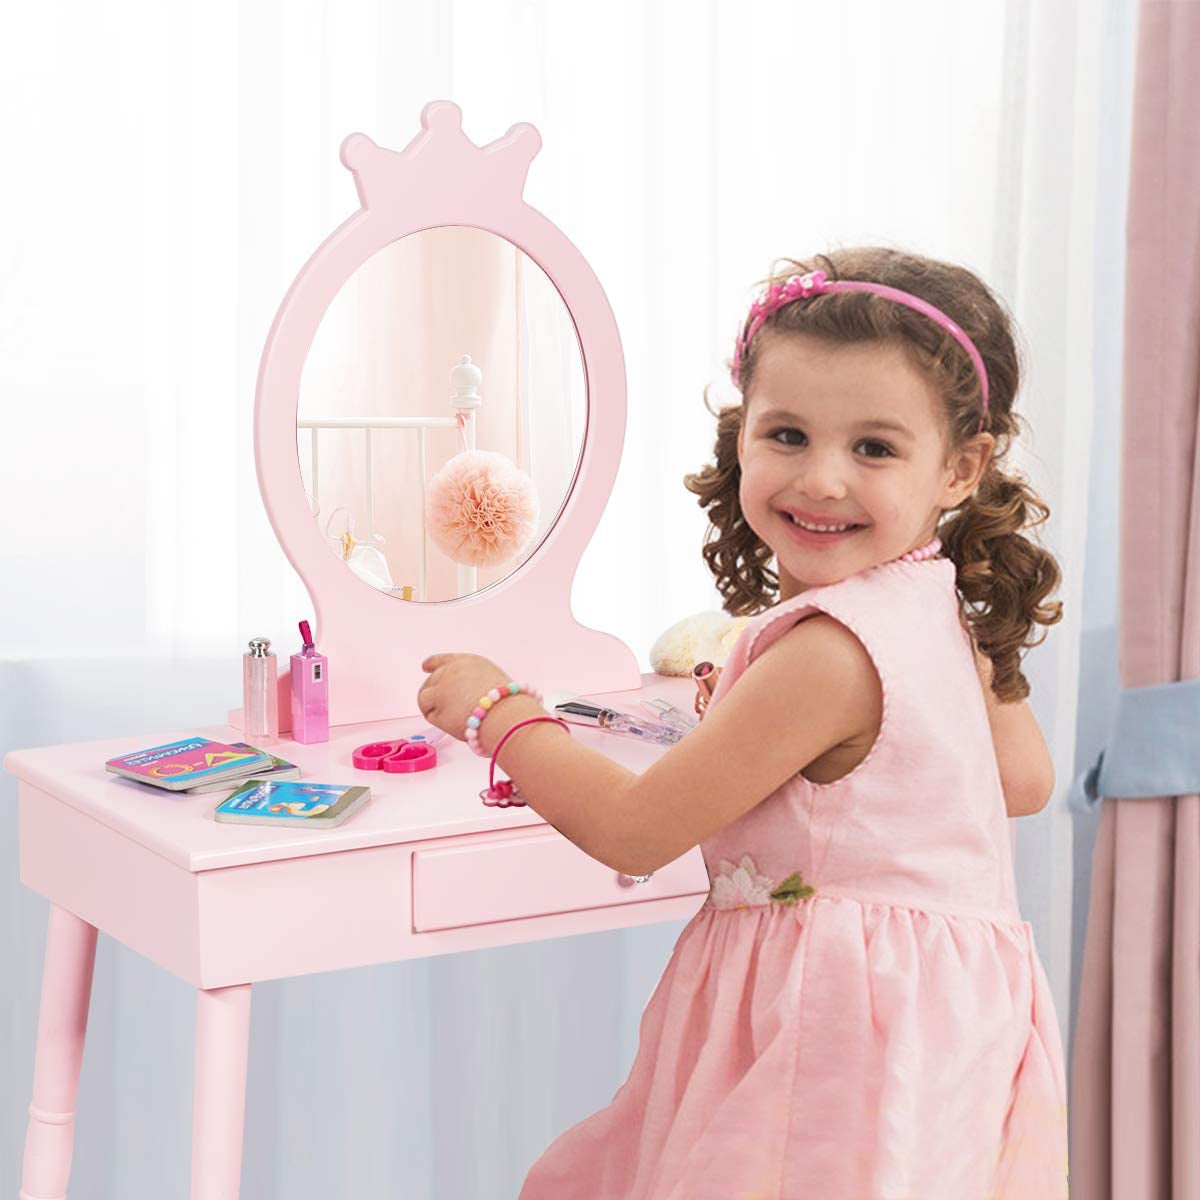 Kids Vanity, Crown Shape Princess Makeup Dressing Table and Chair Set W/Drawer, Cushioned Toddler Vanity Stool, Real Glass Mirror, Wooden Little Girls Vanity Set with Mirror and Stool, Pink